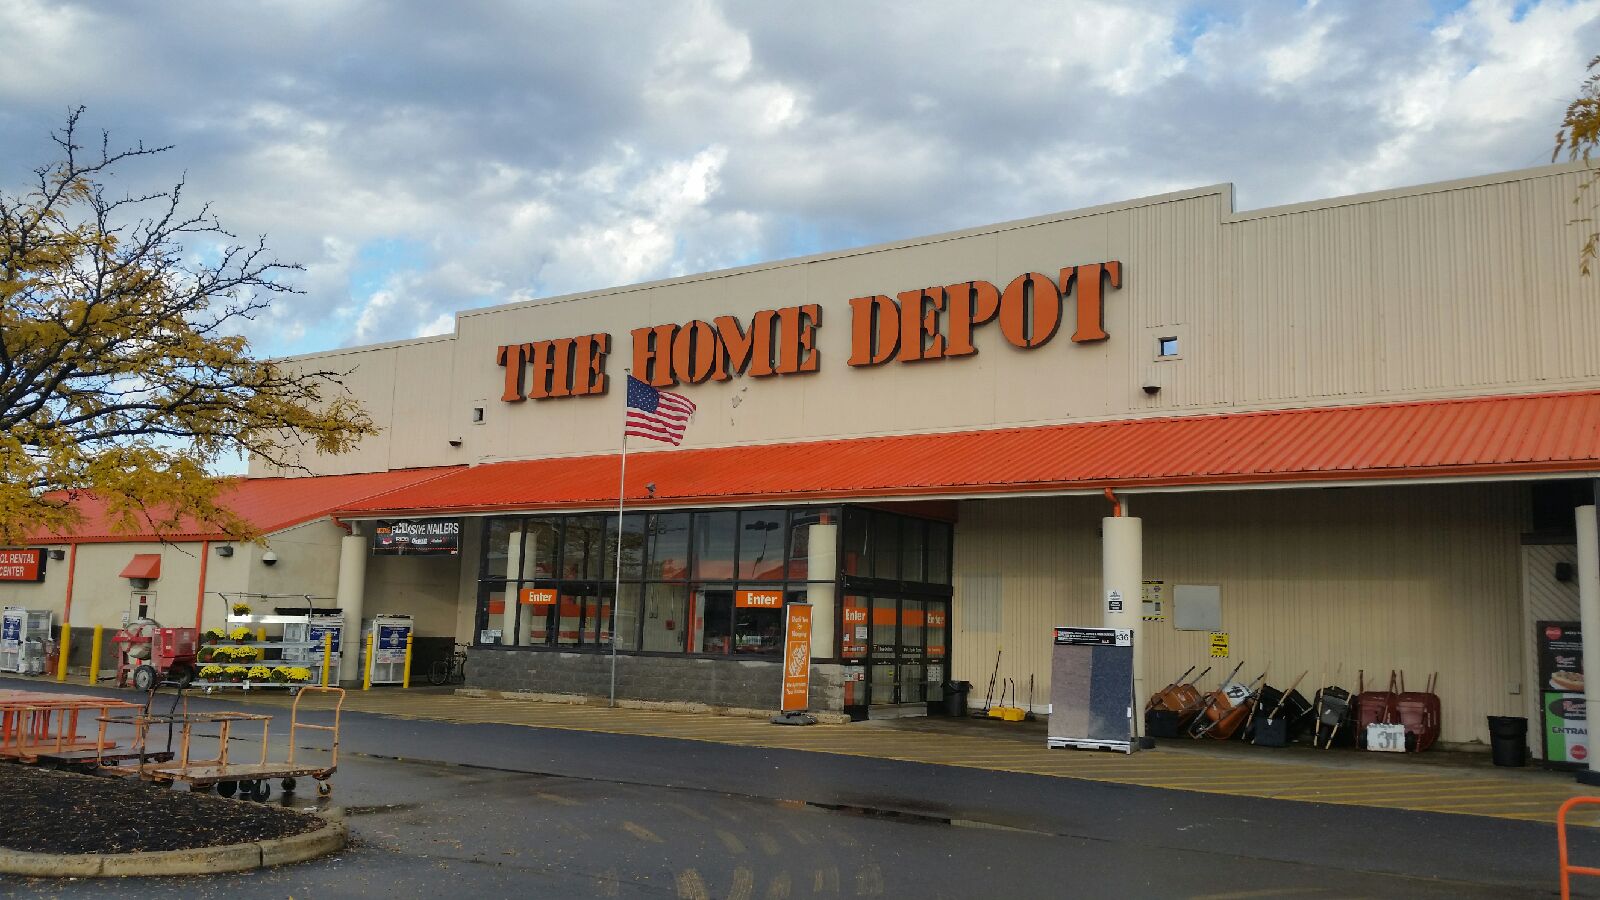 Stores near me. Home Depot. The Home Depot near me. Боди депот город Оклахома. Home-Depot-at-Home-services+Atlanta.